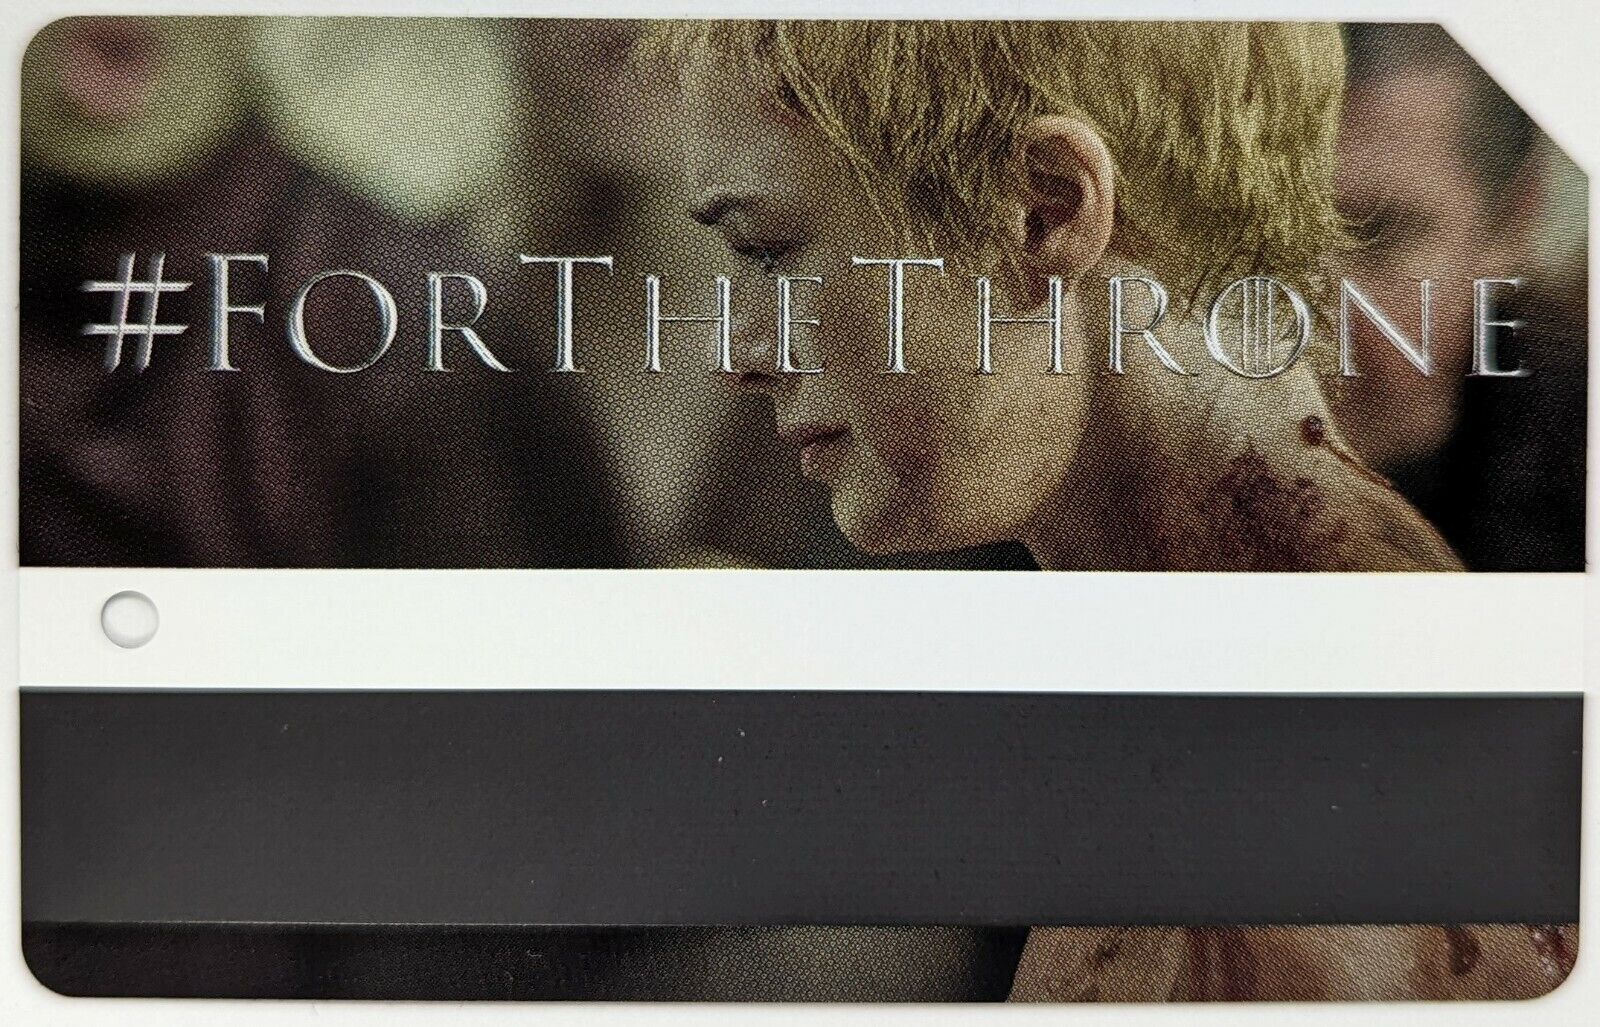 Game of Throne, HBO Ver2 - NYC MetroCard-Expired, Mint condition